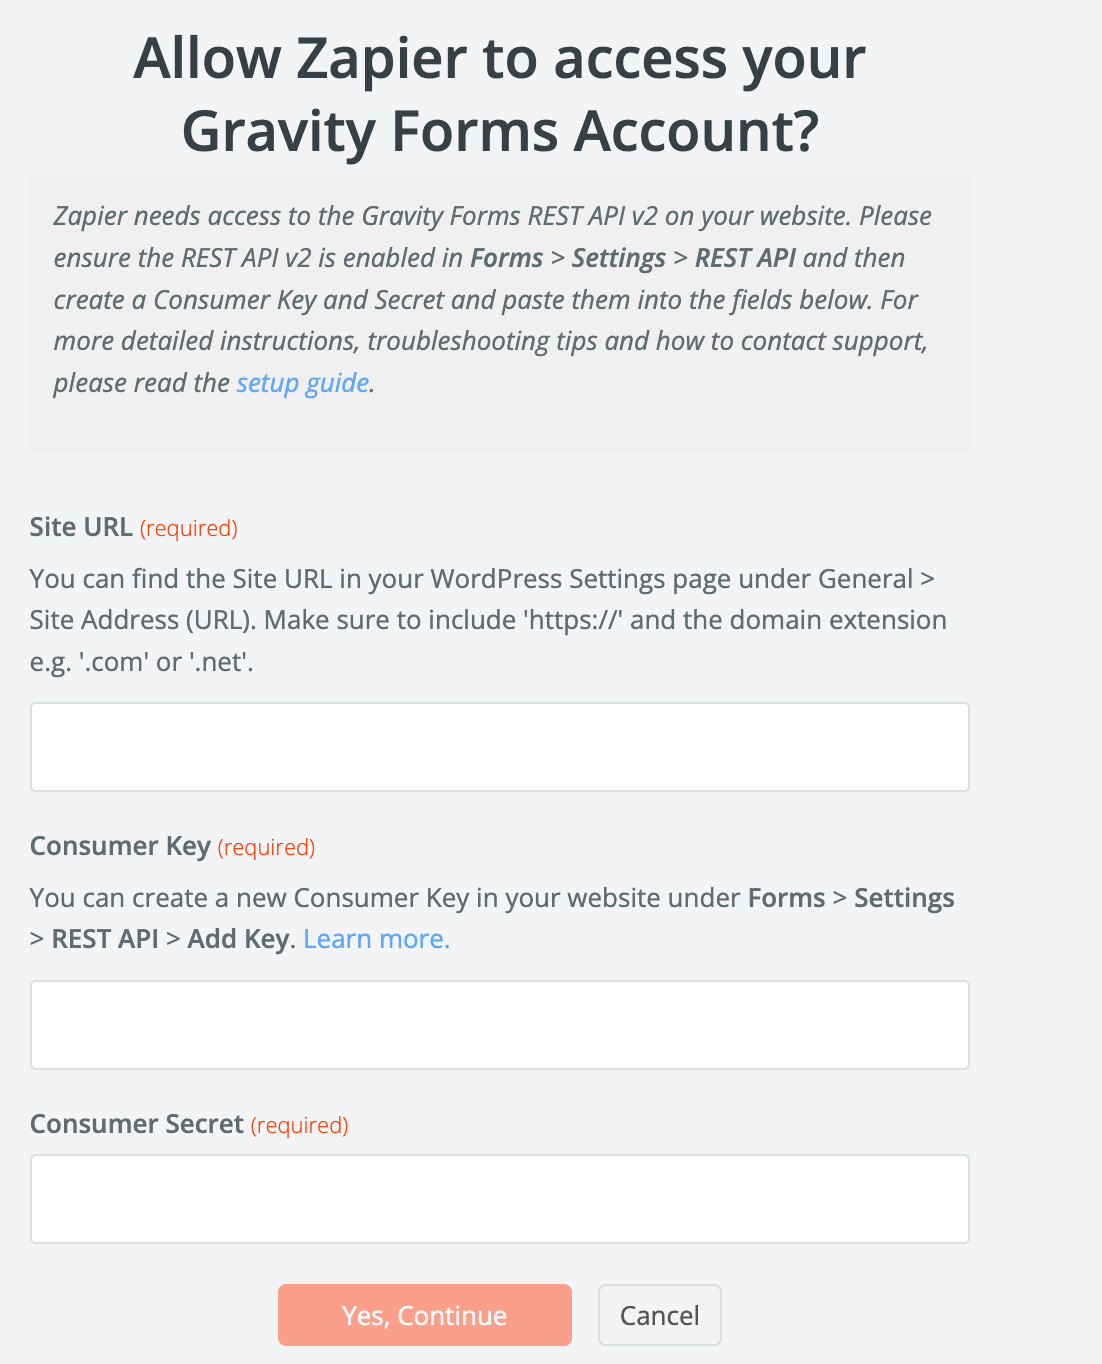 A permissions pop-up titled "Allow Zapier to Access Your Gravity Forms Account?".